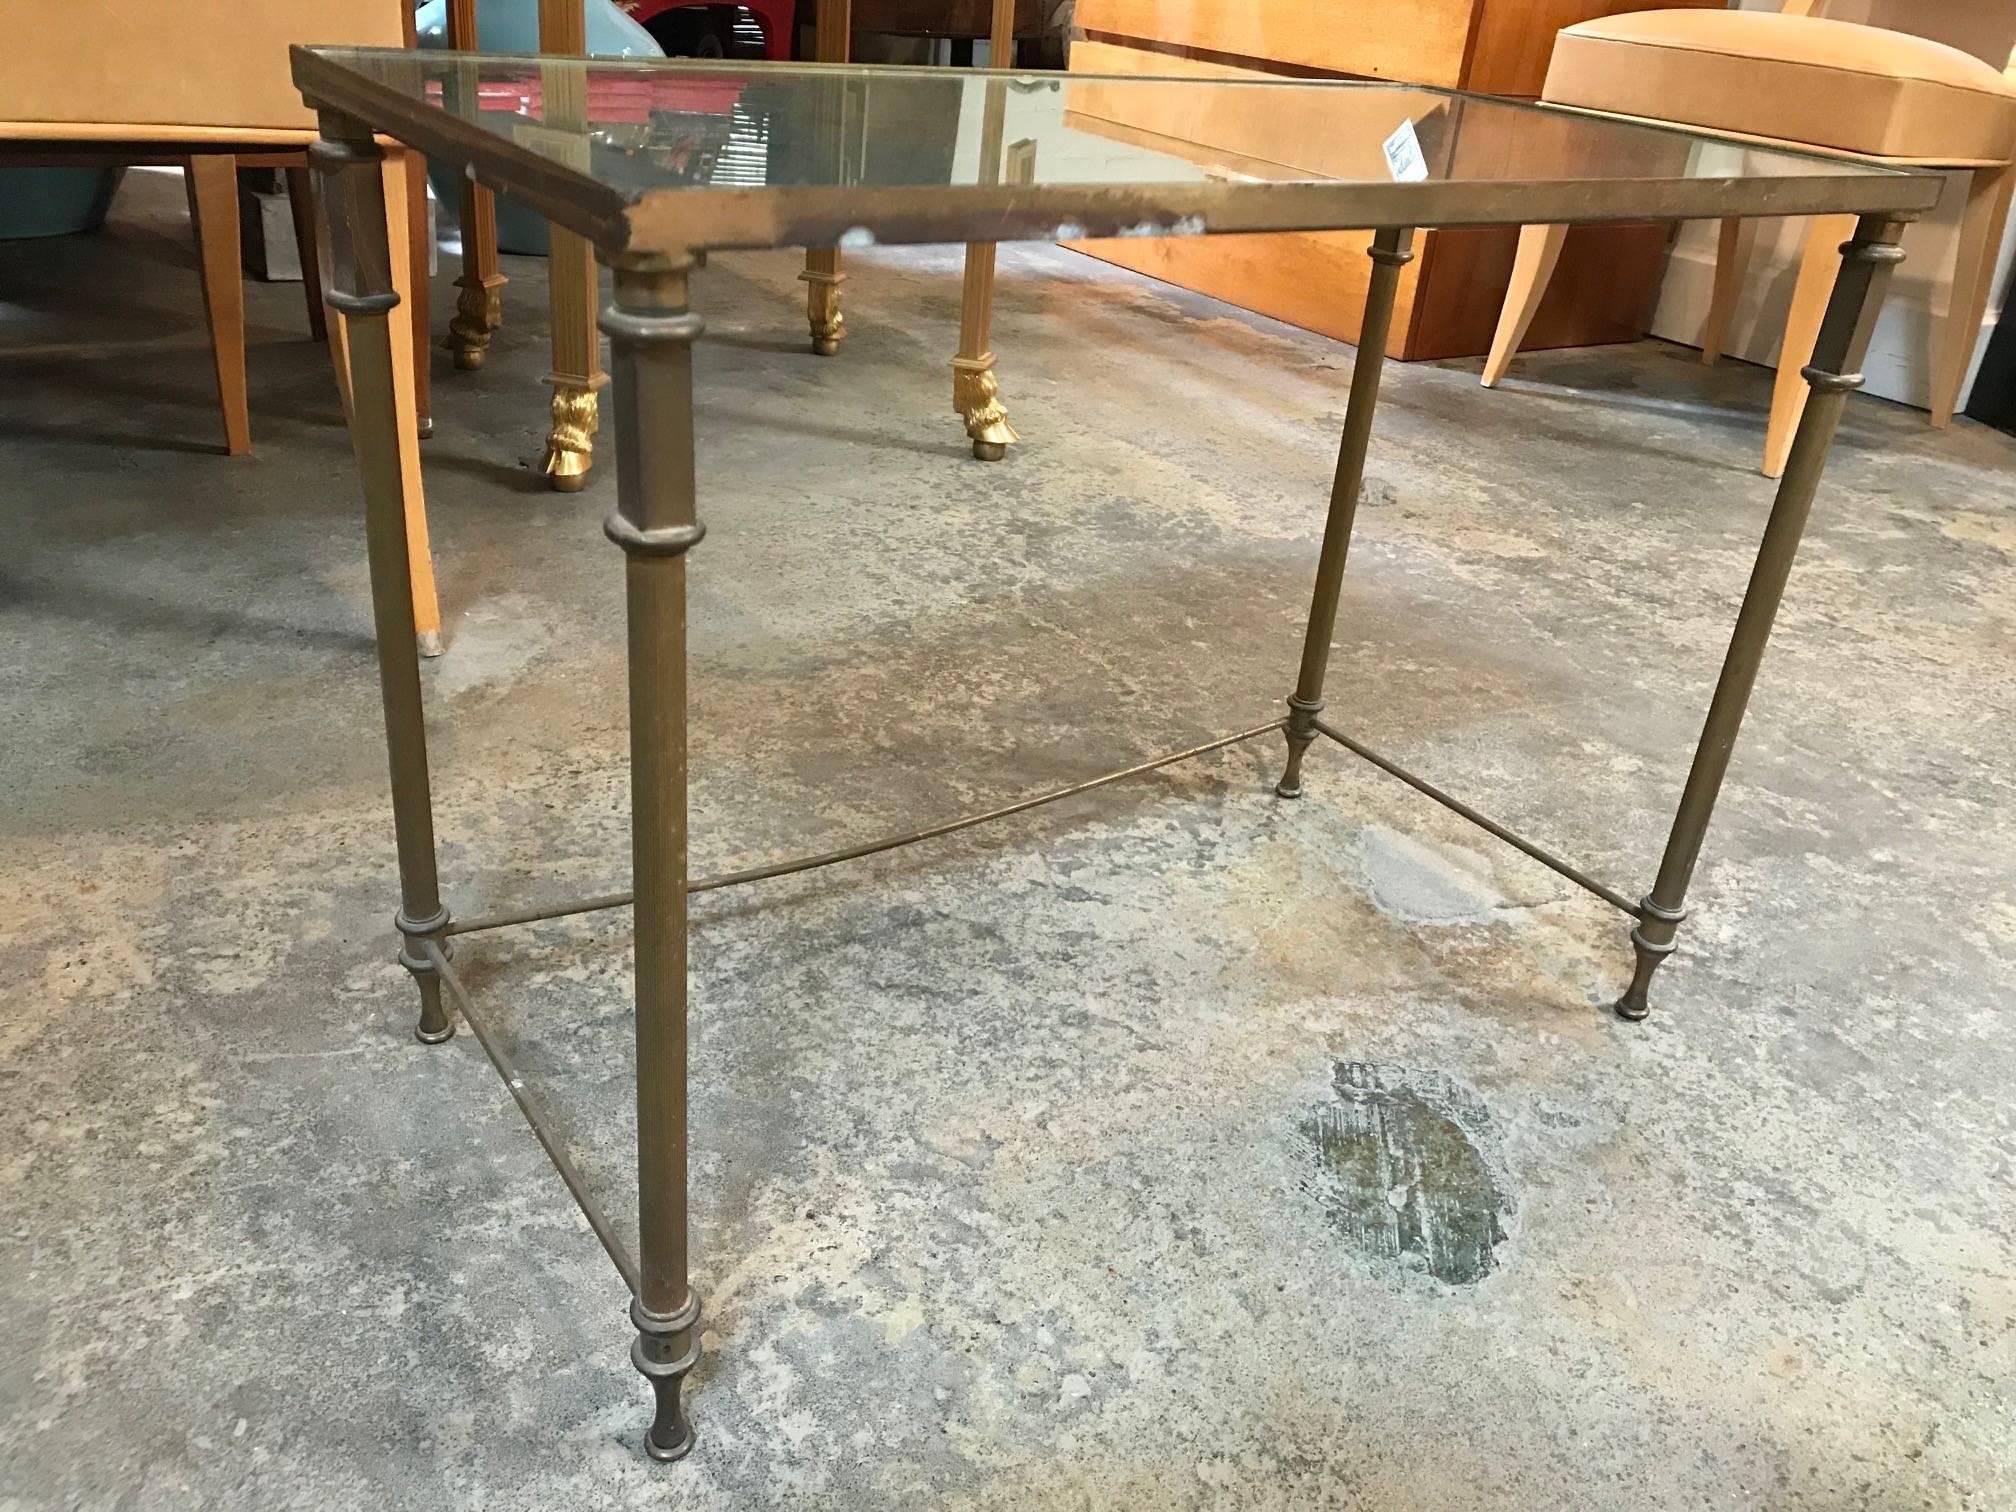 A set of two mirrored French nesting tables.